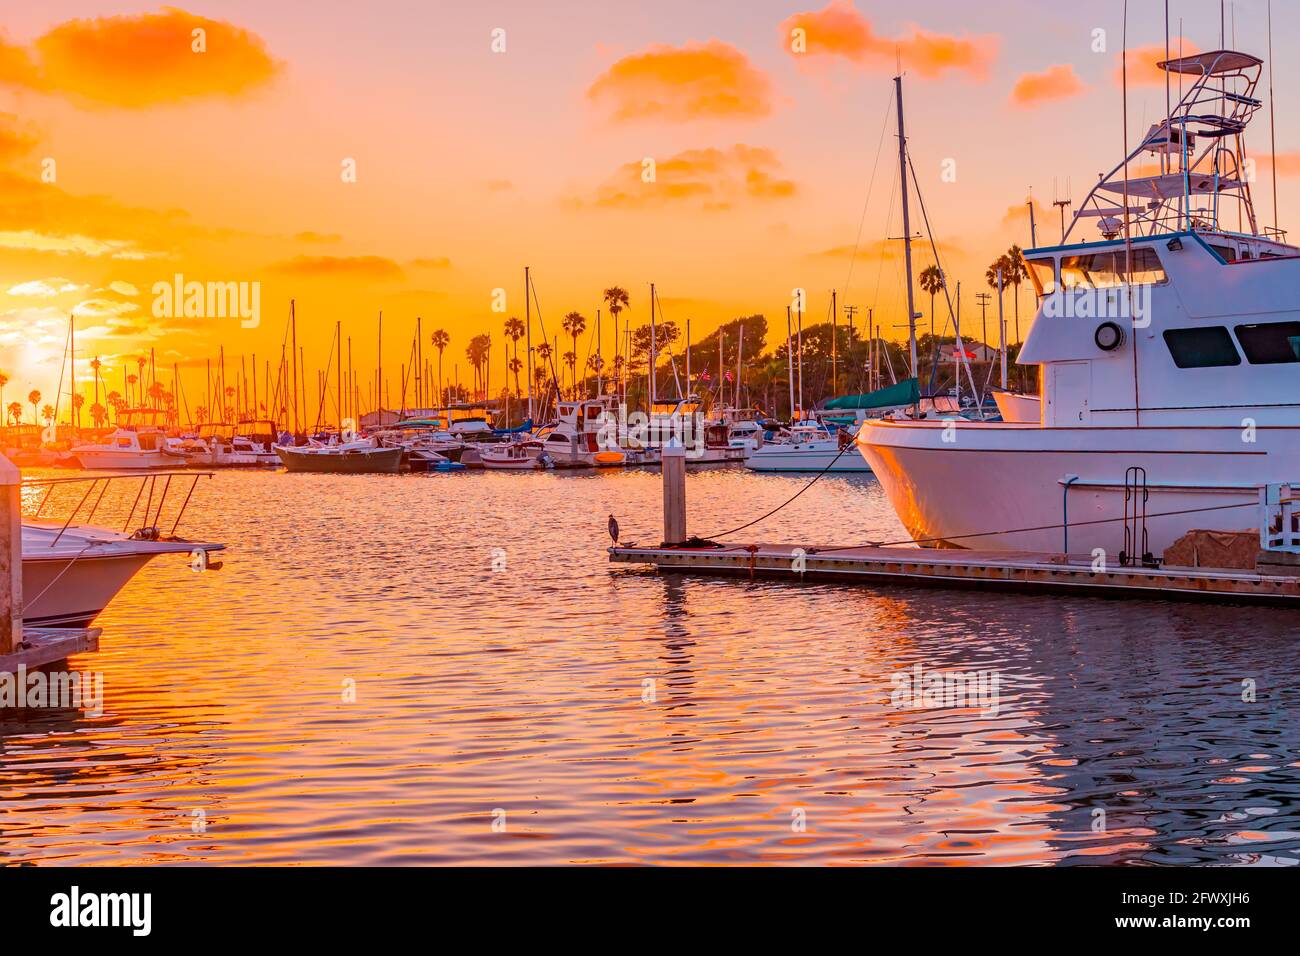 Oranges and pinks highlight all the boats, water and sky in Oceanside Harbor, near Carlsbad, California in Southern California. Stock Photo